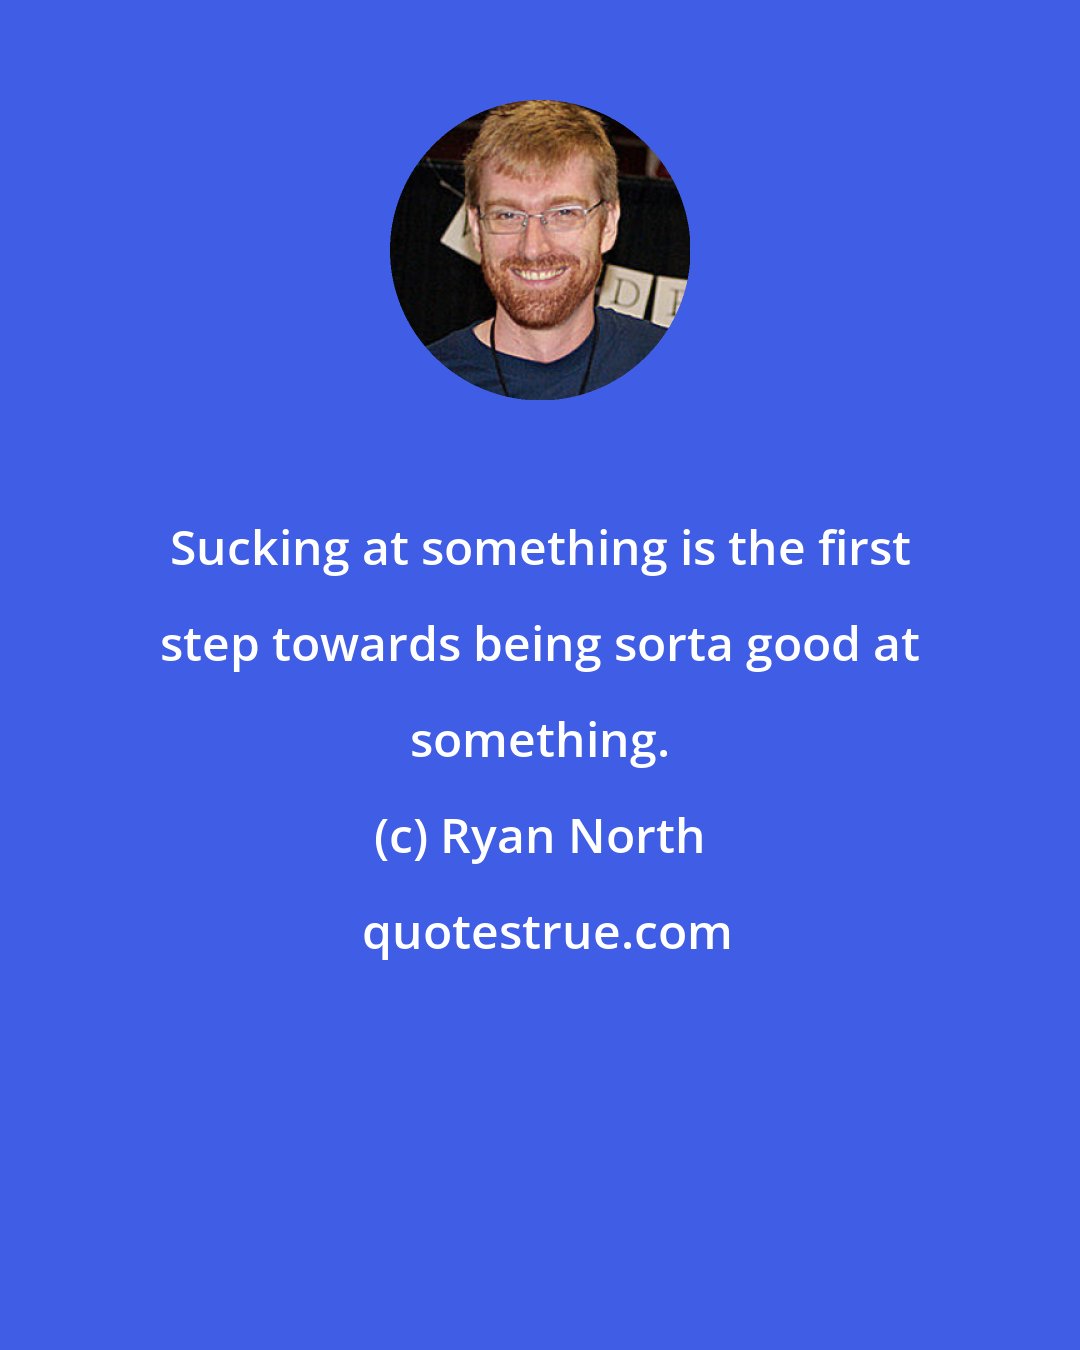 Ryan North: Sucking at something is the first step towards being sorta good at something.